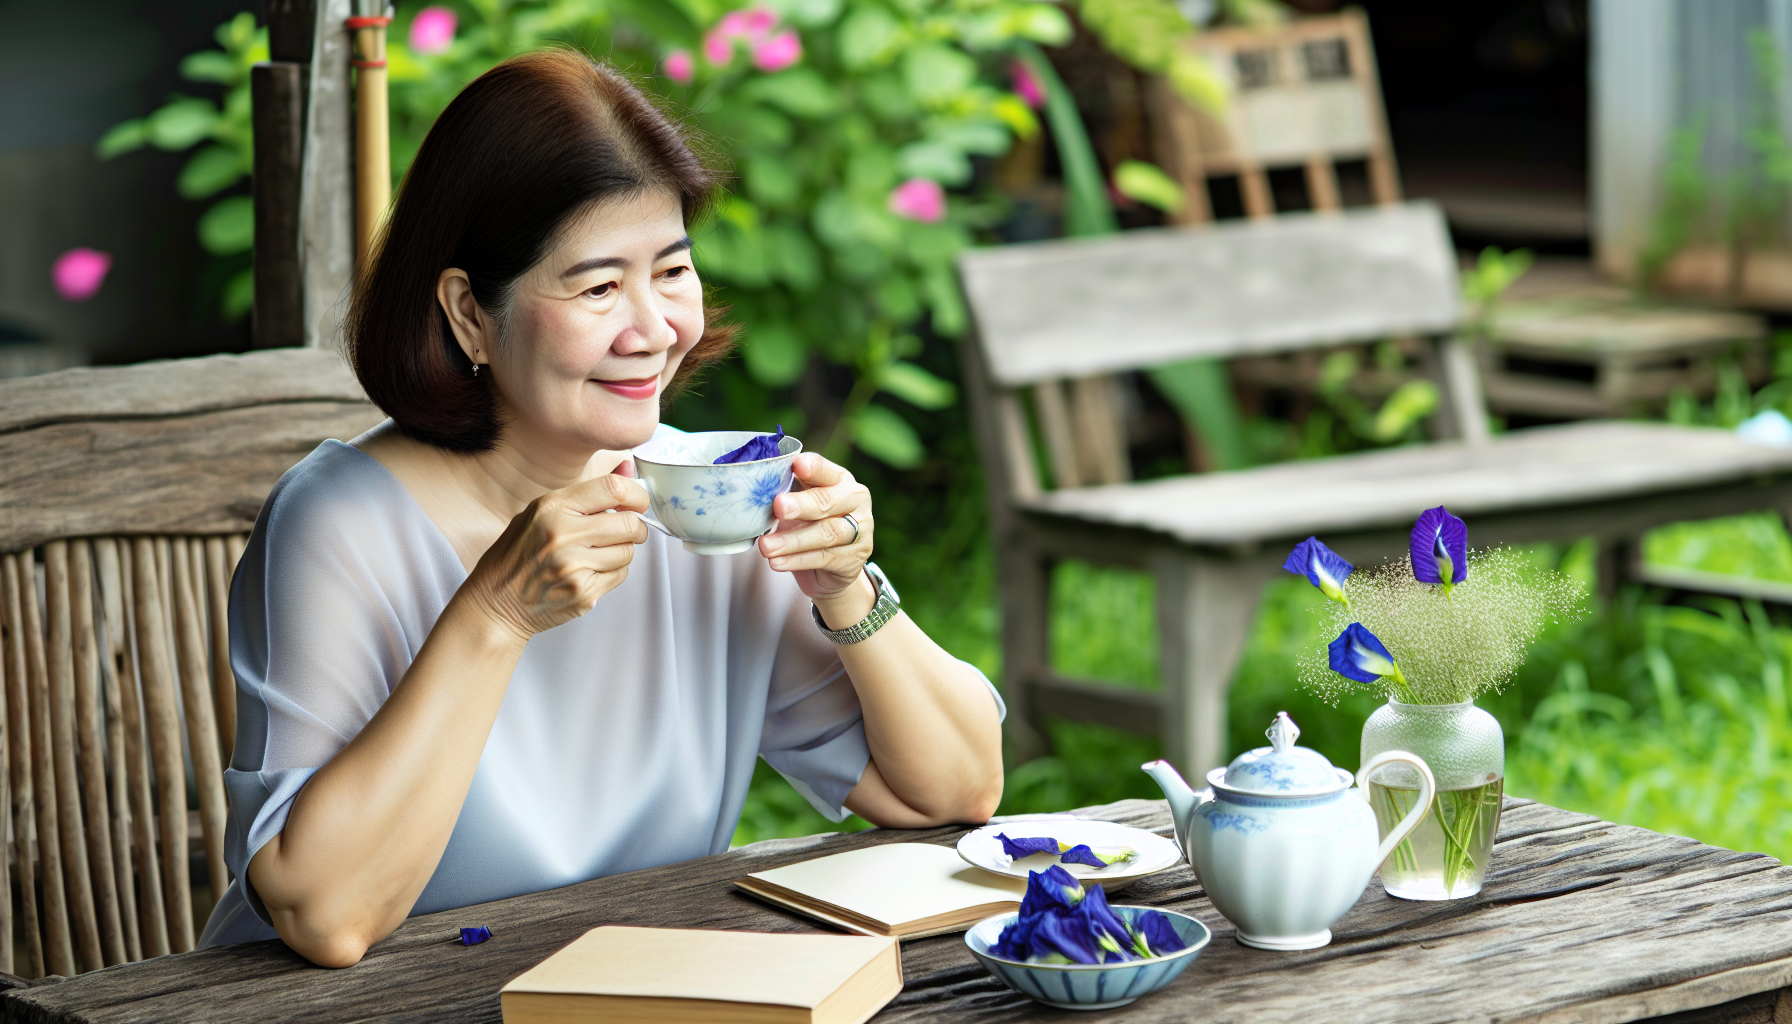 Woman enjoying a cup of butterfly pea flower tea in a peaceful setting